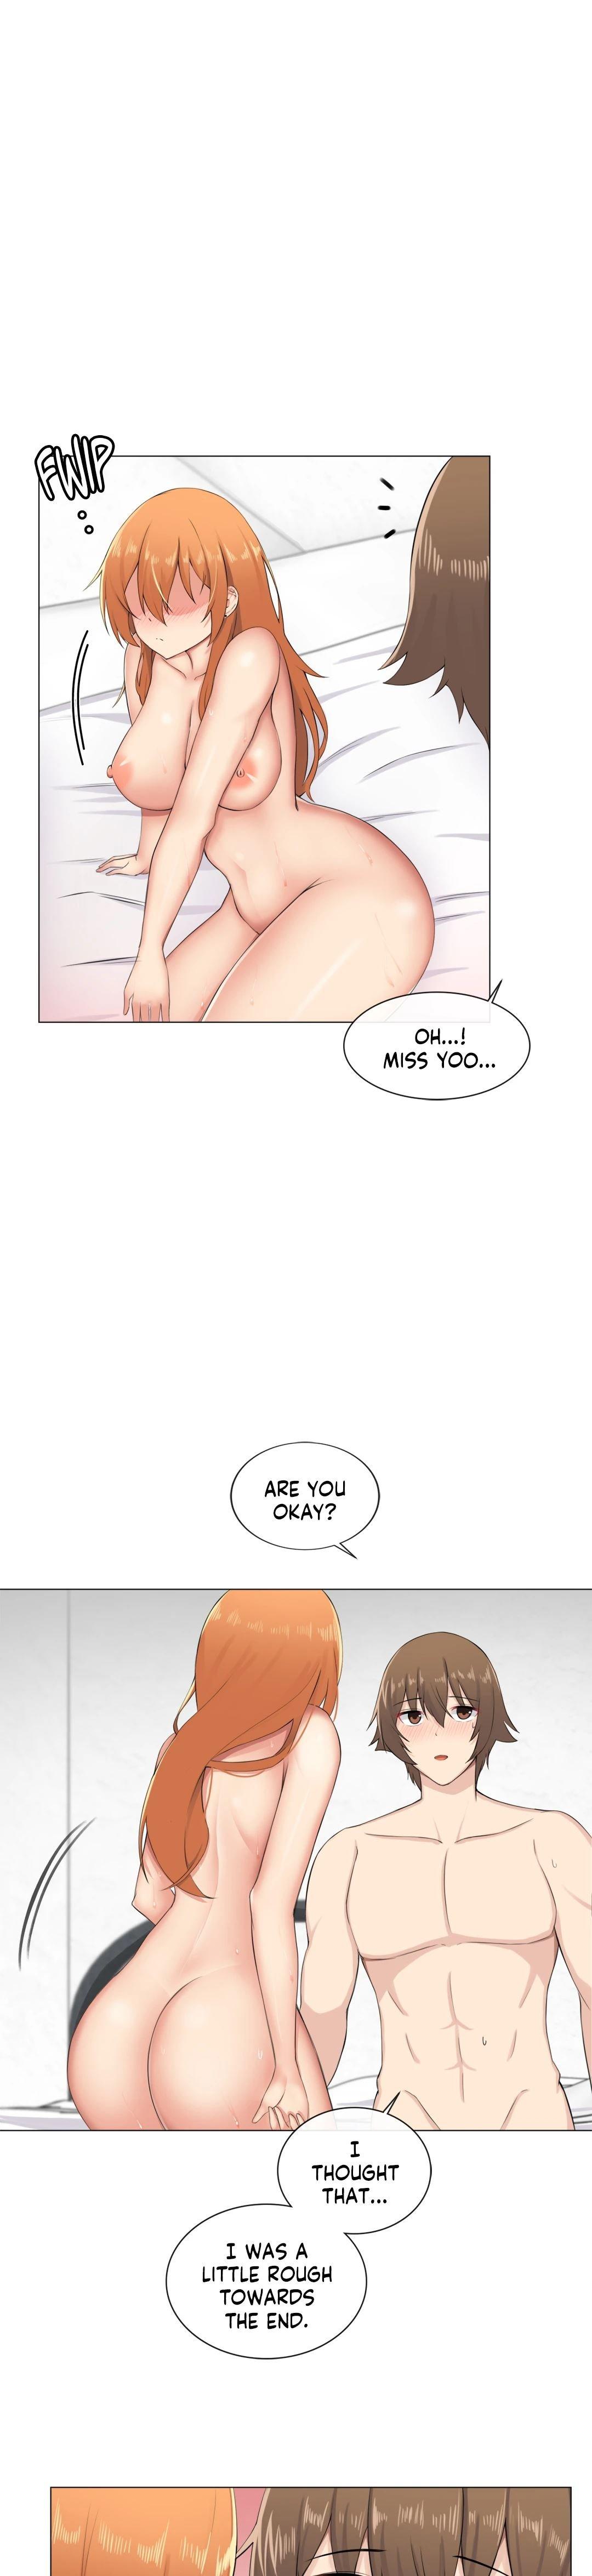 [Dumangoon, 130F] Sexcape Room: Pile Up Ch.9/9 [English] [Manhwa PDF] Completed 178